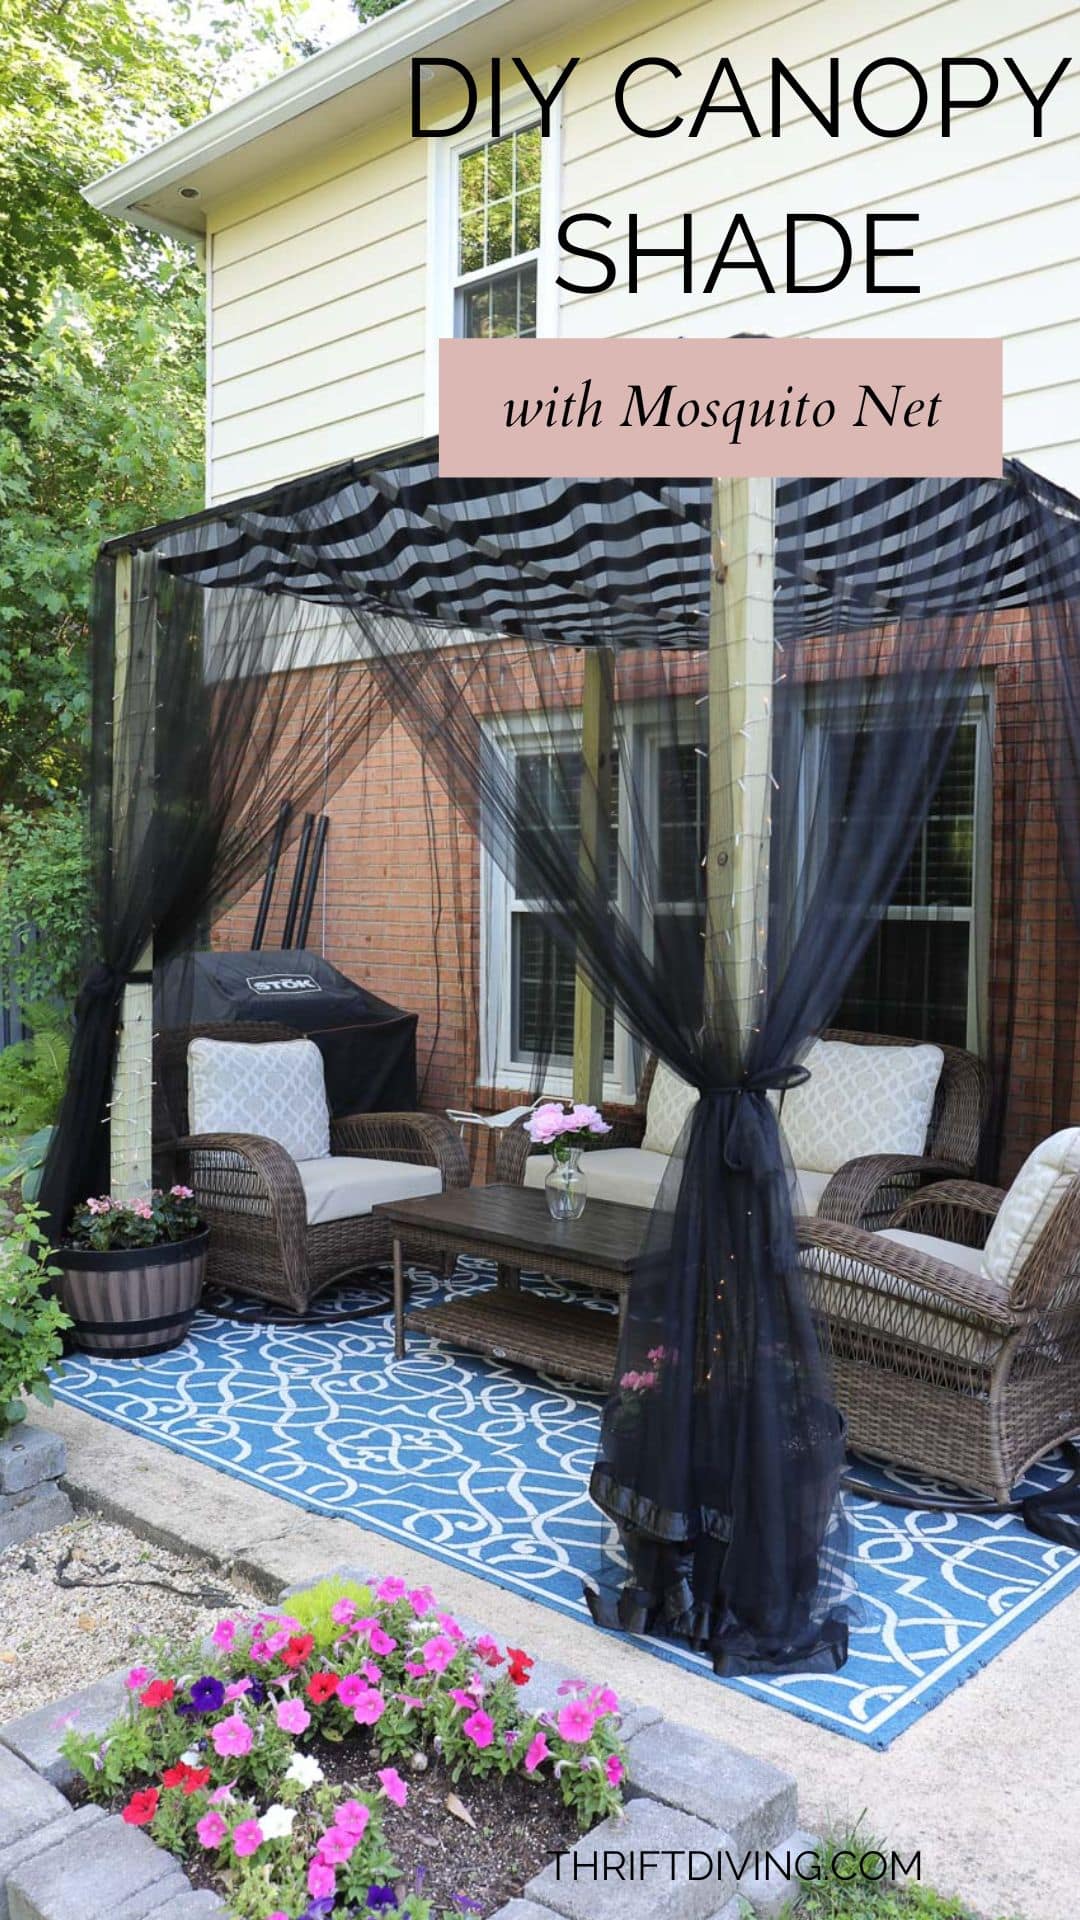 How to Make a DIY Canopy Shade with Mosquito Net for the Patio! - Thrift Diving